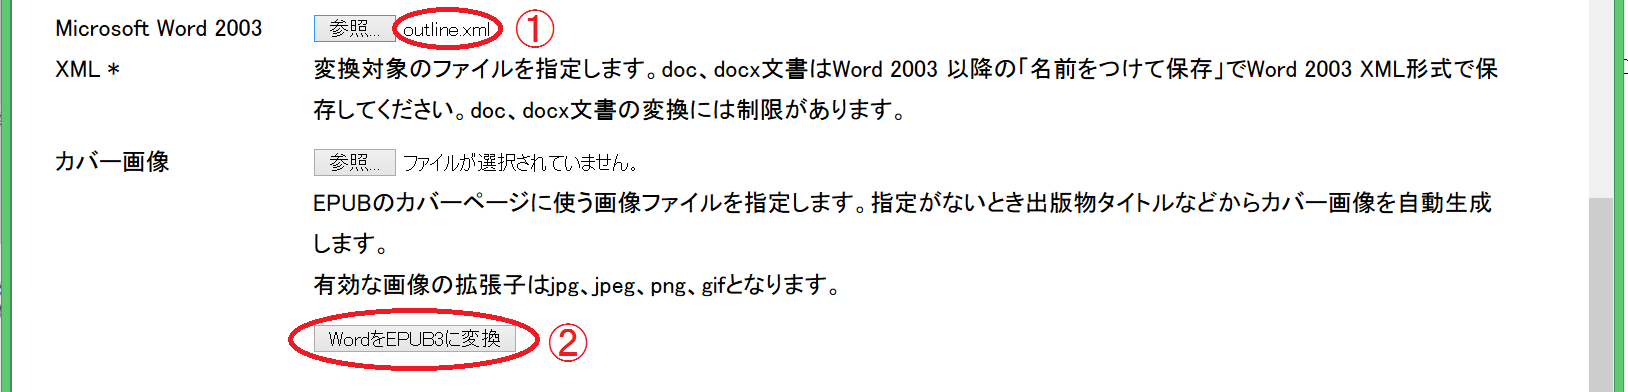 images/wordconv2.png